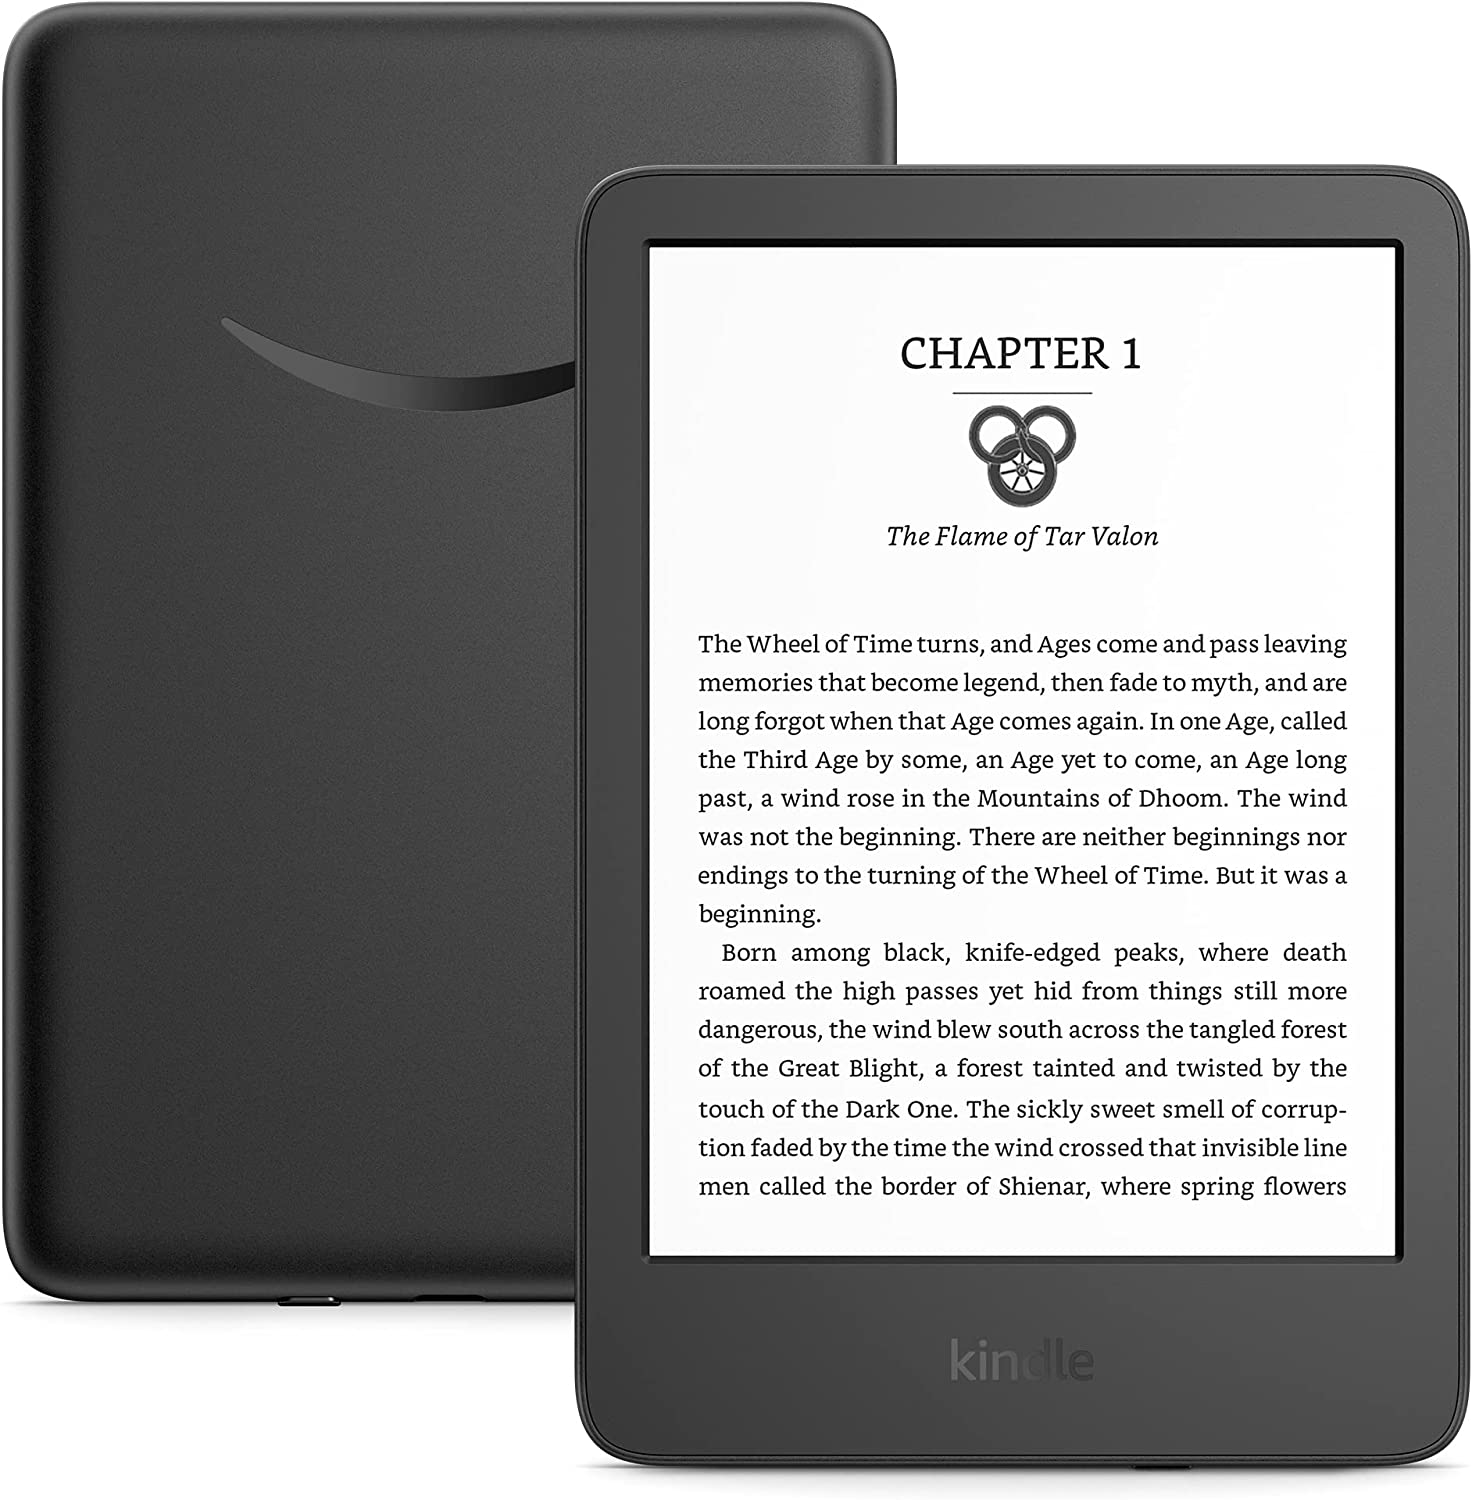 All-new Kindle (2022 release) – 300 ppi high-resolution display